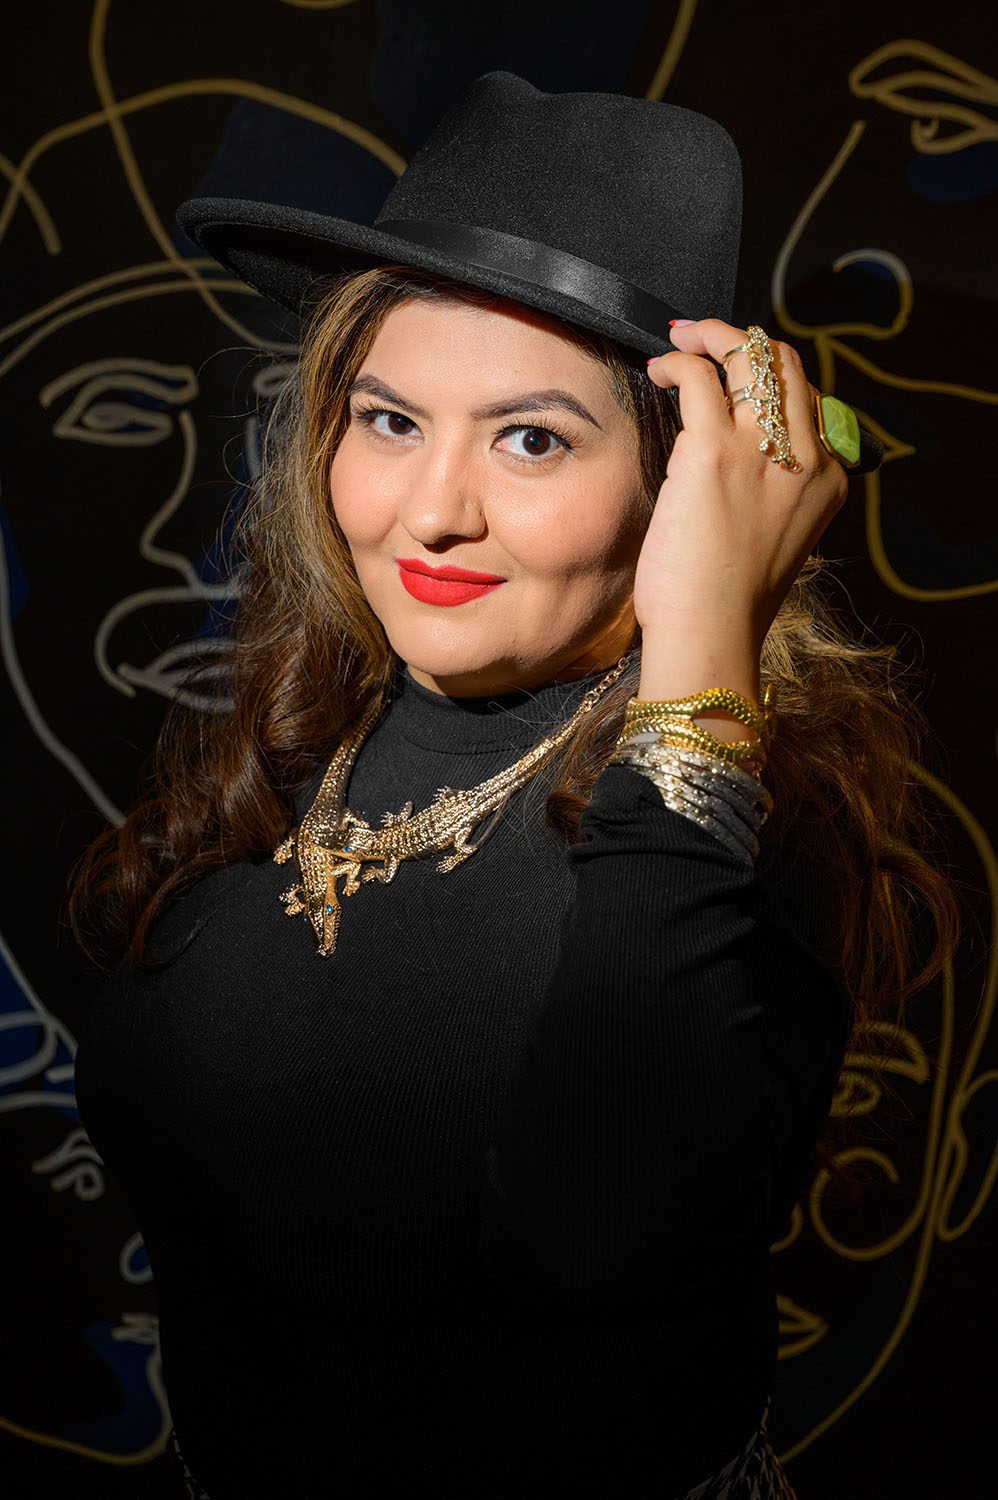 Professional photography of Woman stands in front of mural while wearing large hat and alligator jewelry